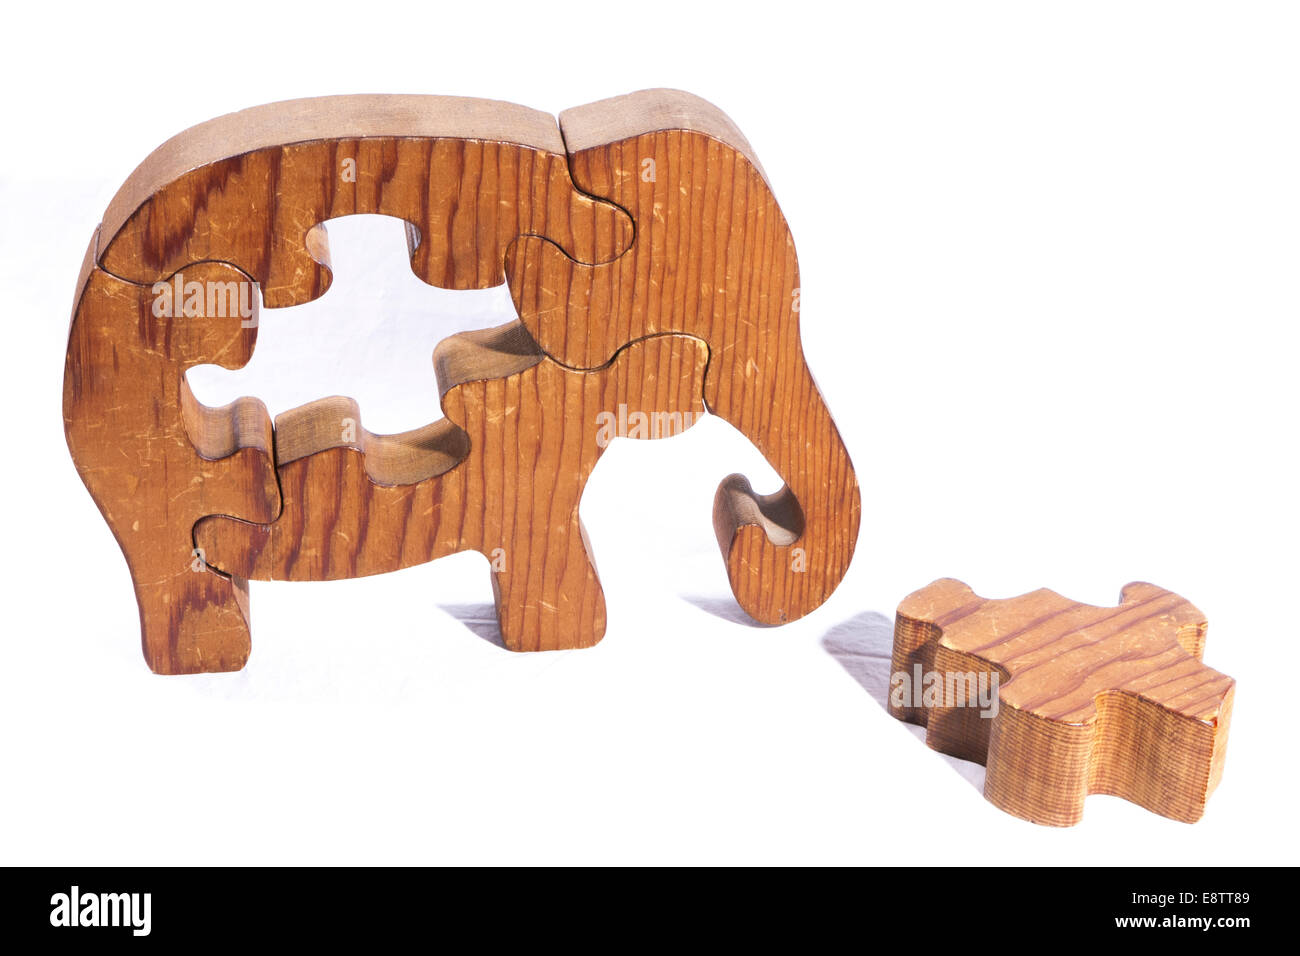 Wooden Elephant puzzle with a piece laying on the table. Stock Photo